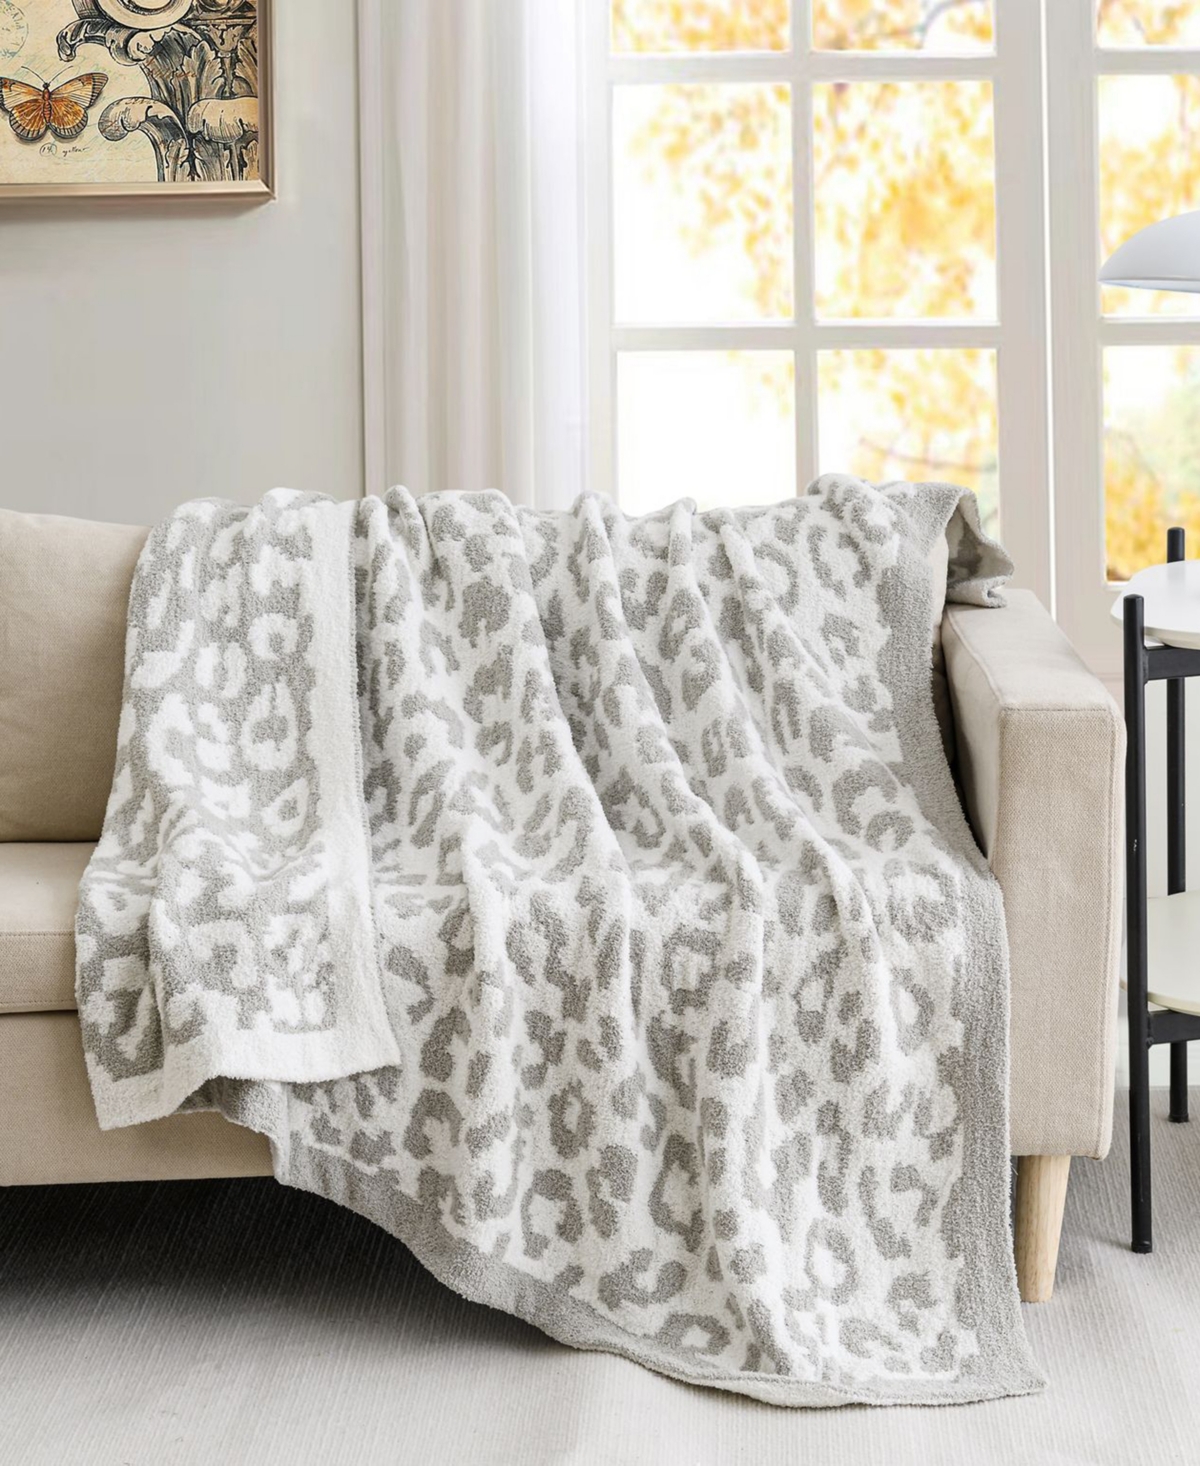 Sutton Home Jacquard Knit Throw 50" X 60" In Leopard